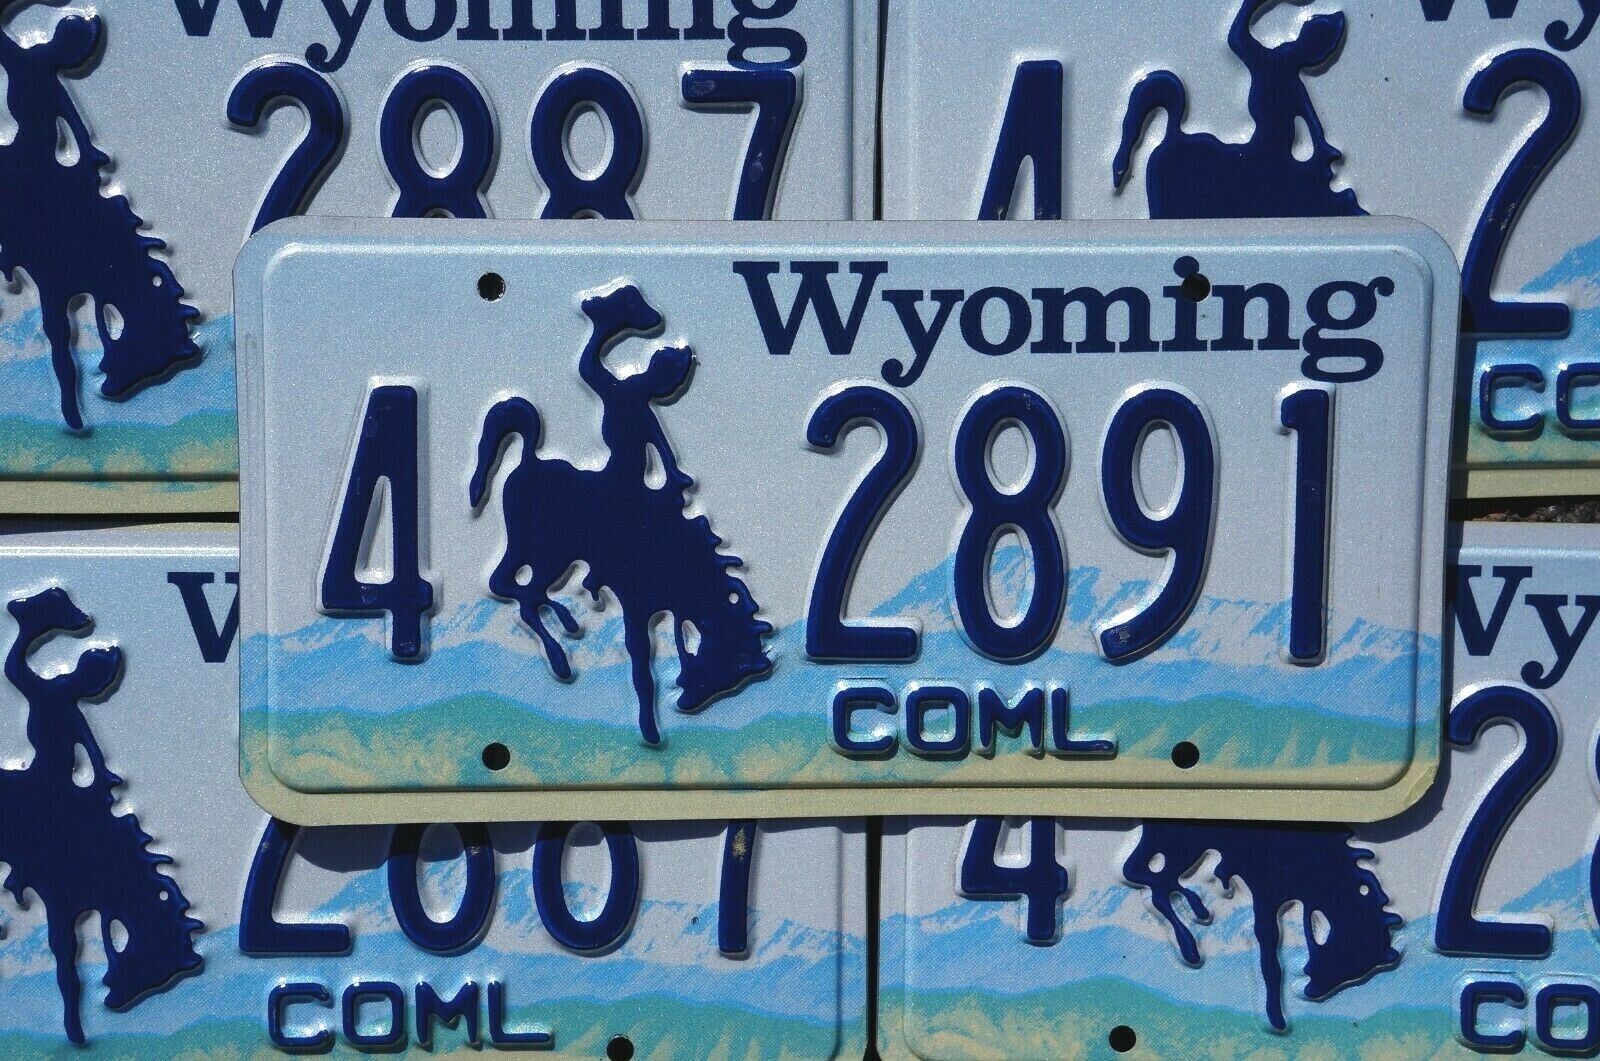 ONE or MORE Embossed WYOMING License Plate Plates - Nice Quality Original